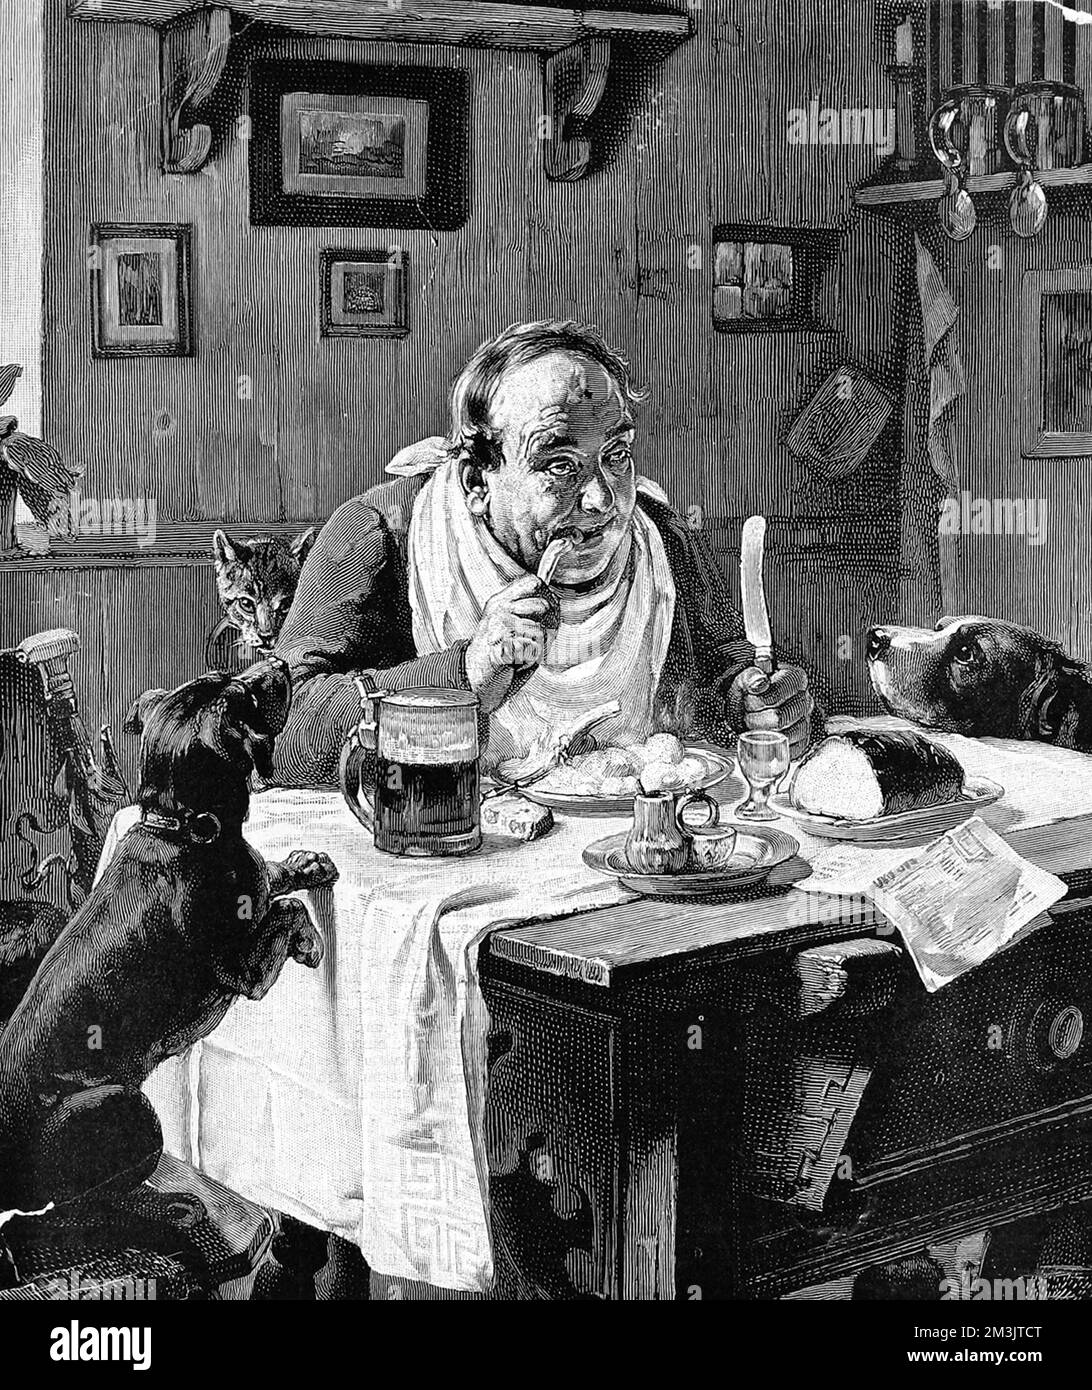 Man at his dinner table eating chops, potatoes and bread watched by two hungry dogs and a cat. There is a tankard on the table next to him and he has a napkin around his neck.  1887 Stock Photo